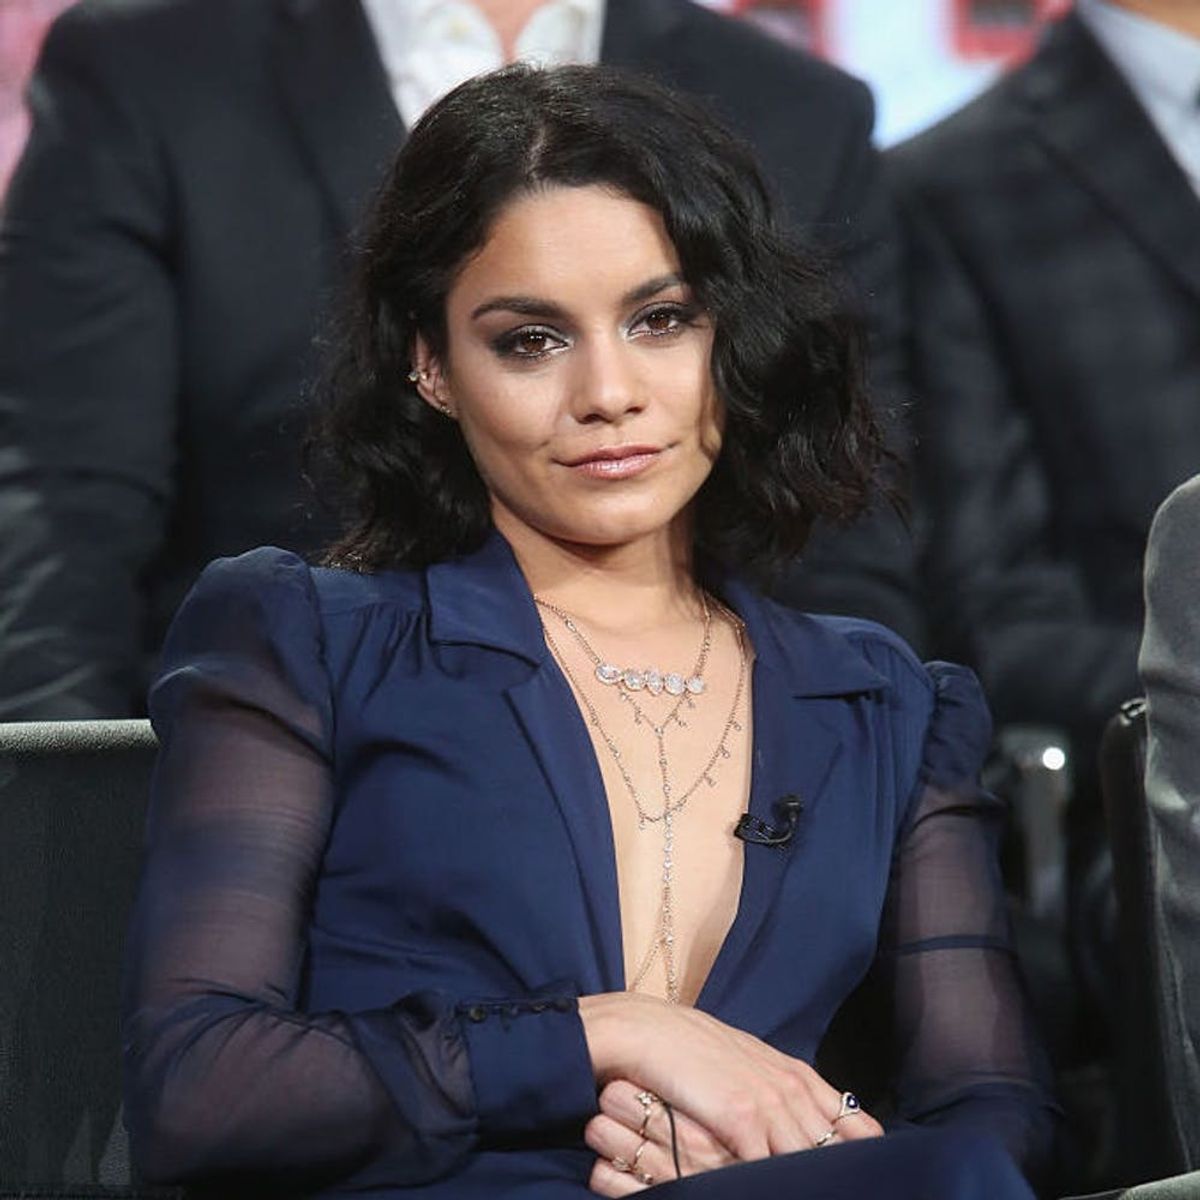 Vanessa Hudgens Opens Up About Coping With Grief on Live TV